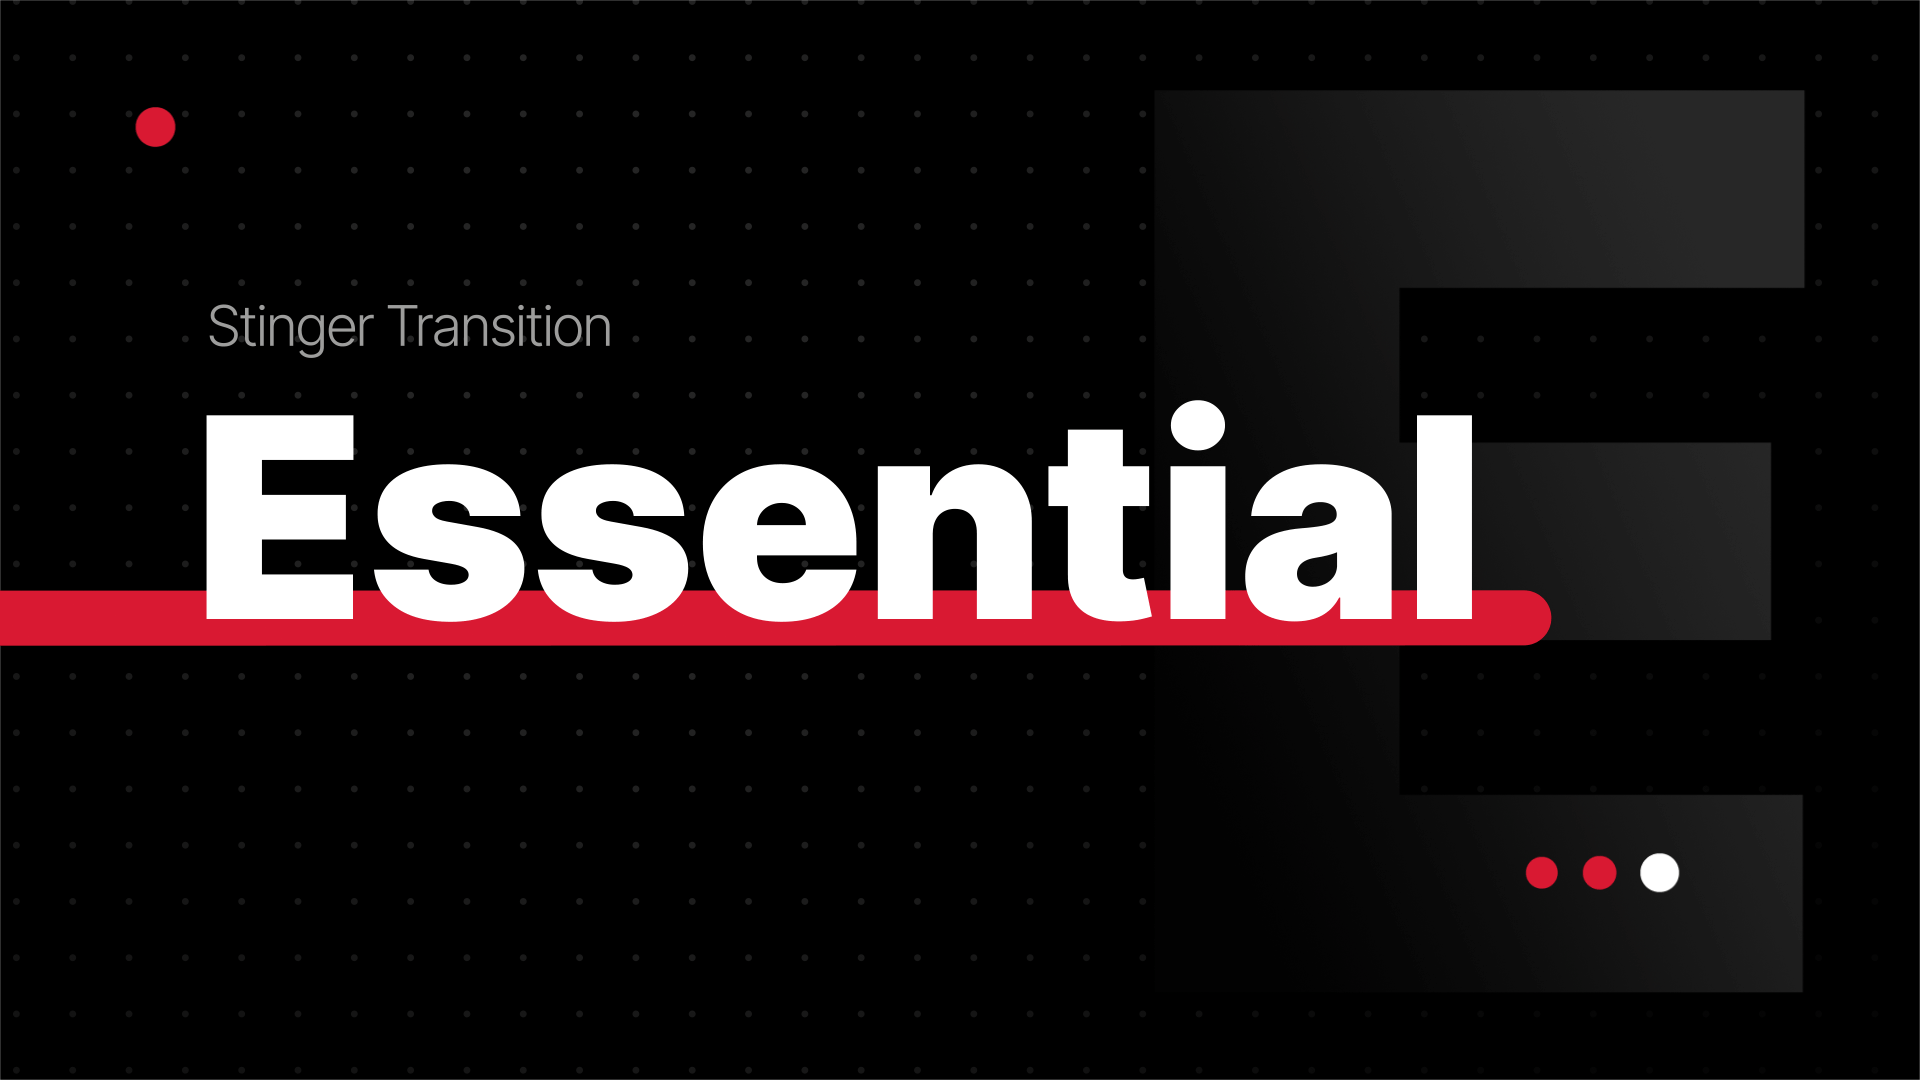 Essential — Stinger Transition for Twitch, Youtube and Facebook